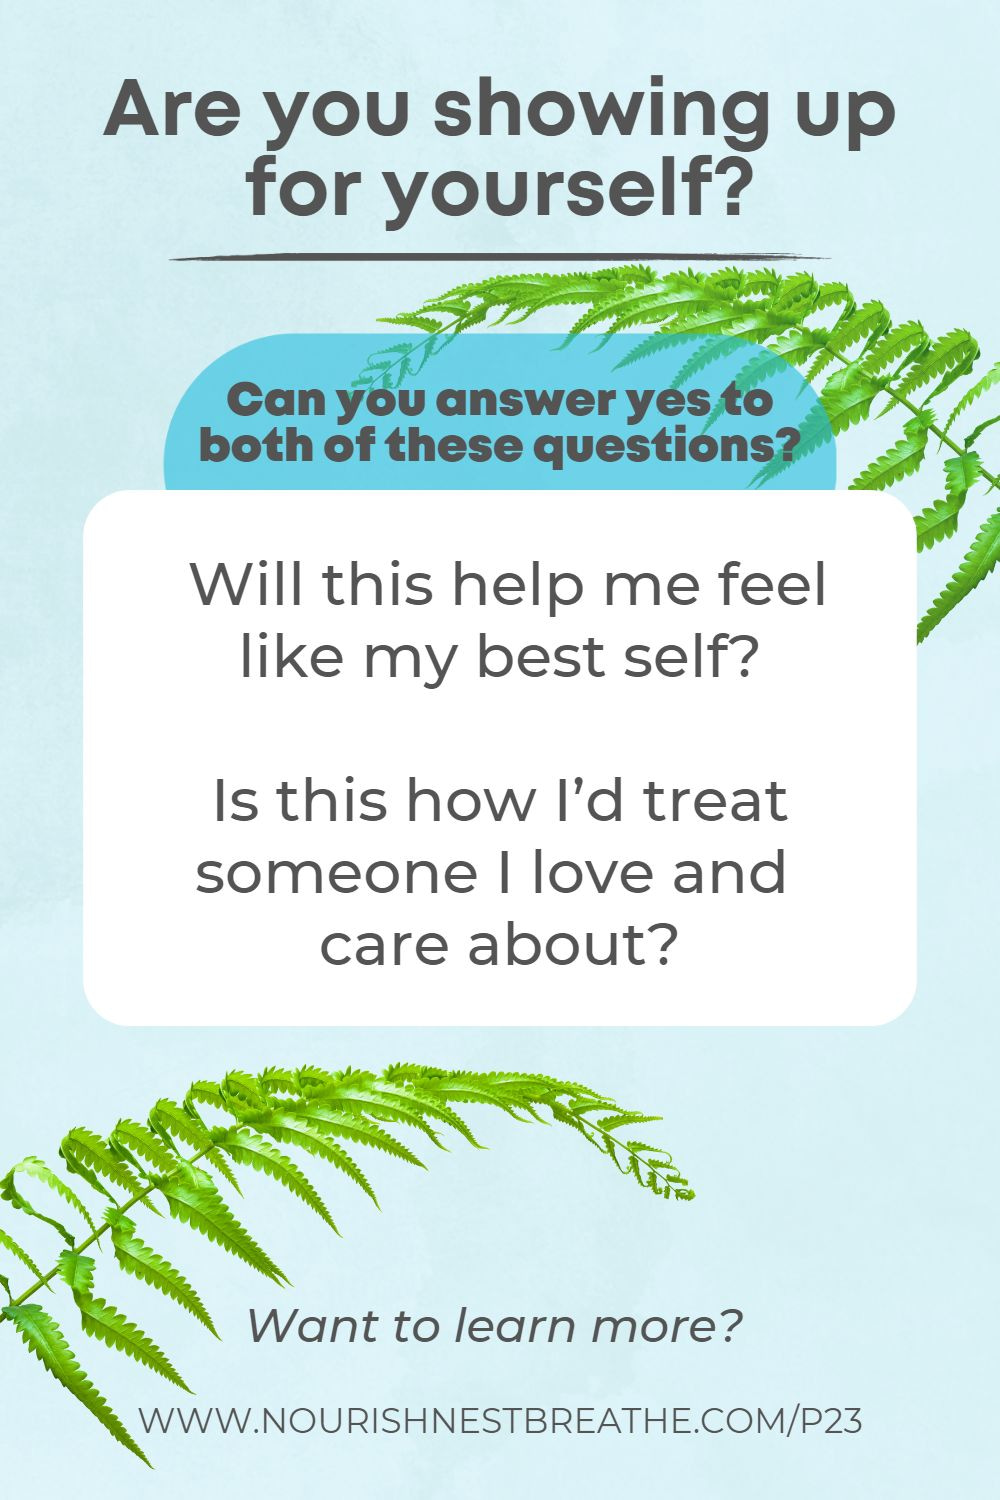 Are you showing up for yourself? Can you answer yes to both of these questions? Will this help me feel like my best self? Is this how I'd treat someone I love and care about?